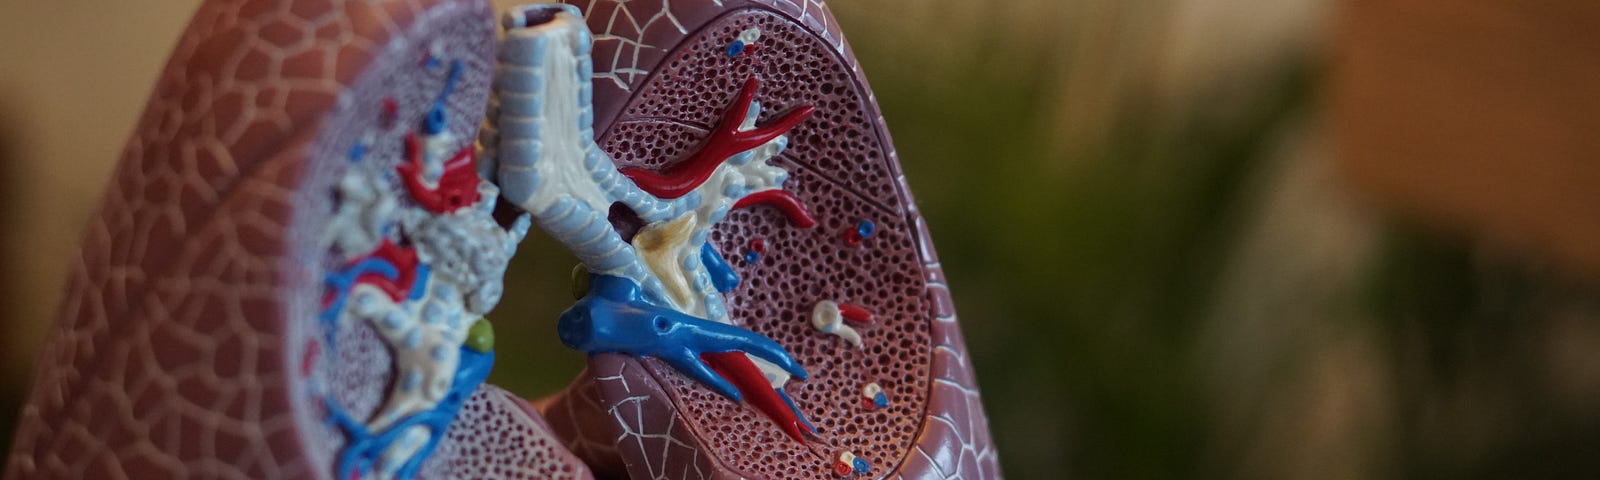 model of lungs